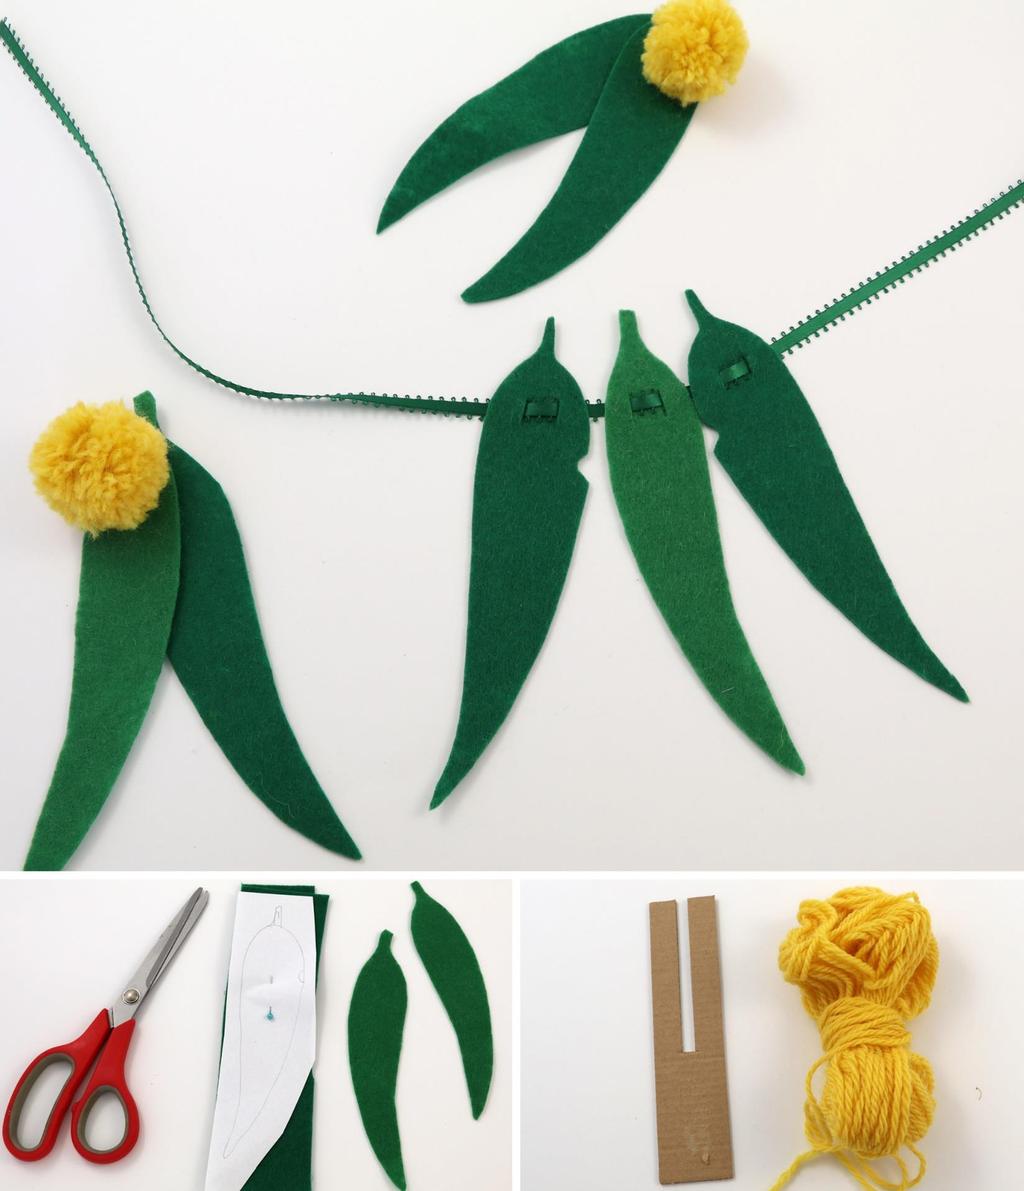 Making the gumleaf necklace and decorations